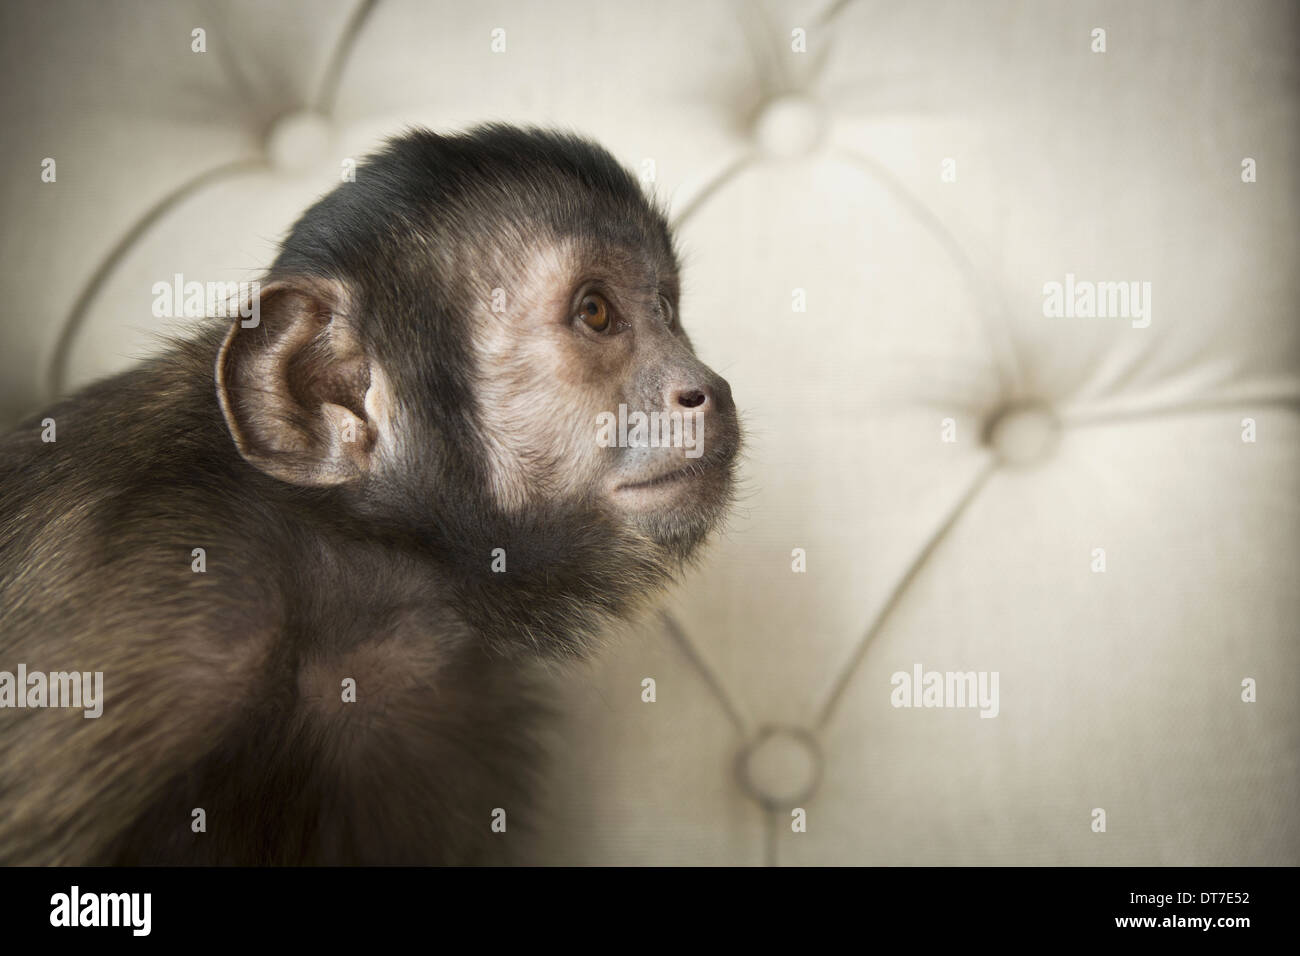 A capuchin monkey seated on a buttonbacked upholstered chair Austin Texas USA Stock Photo